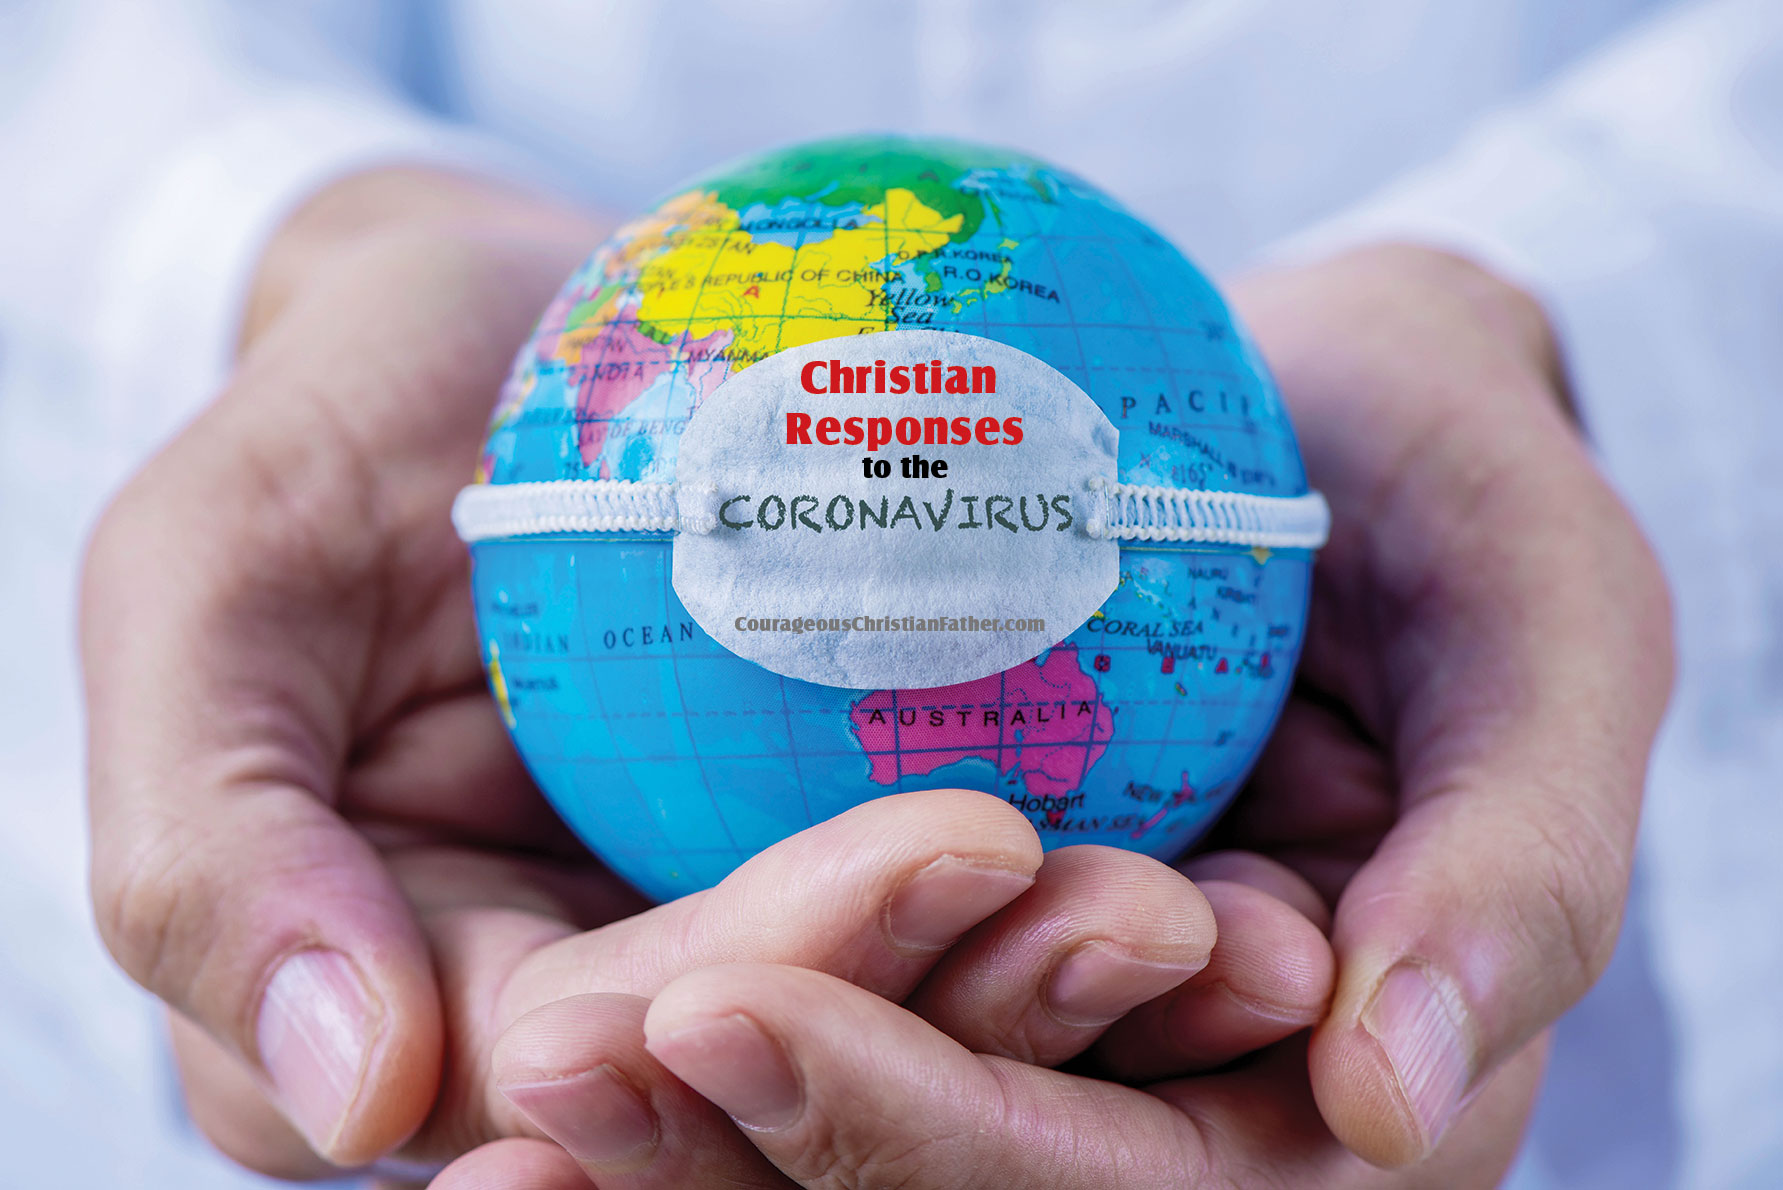 Christian Responses to the Coronavirus - I have shared some quotes I have found from individuals, churches, and ministries. 